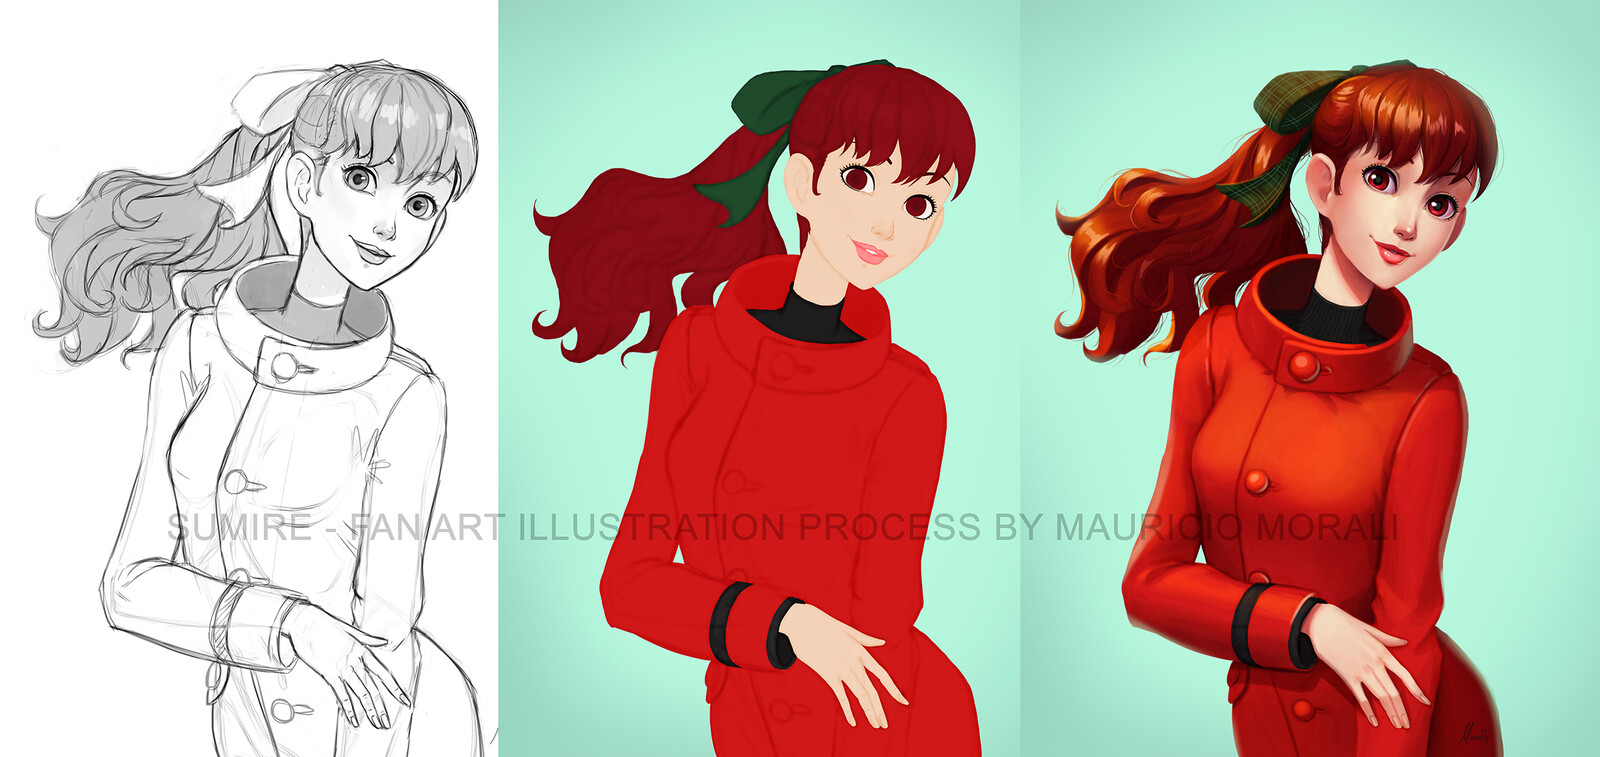 A bit of my process, from sketch to flat colors to render.